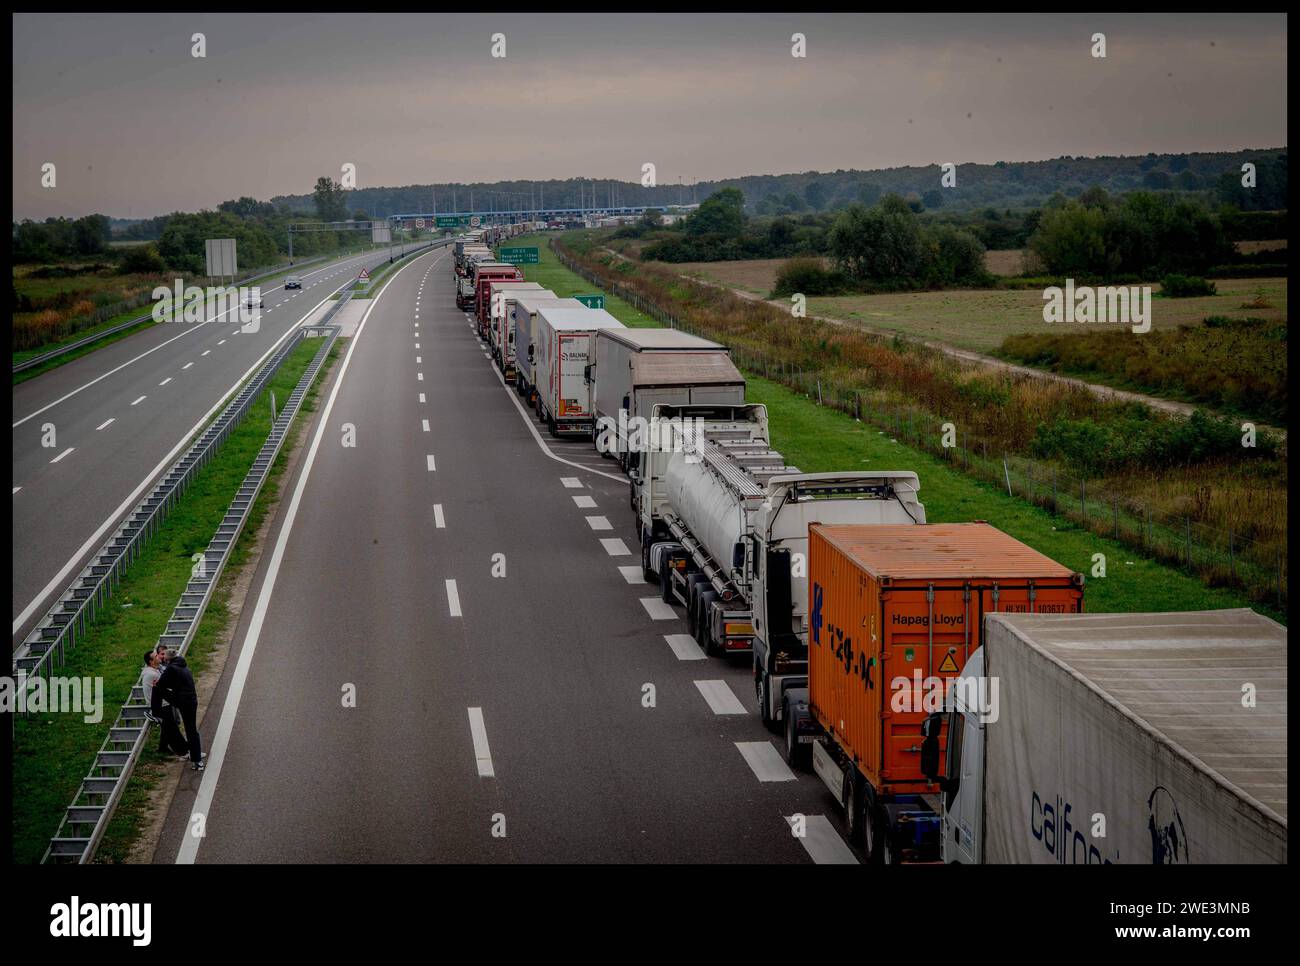 Image ©Licensed to Parsons Media. 22/09/2015.Croatia. Migrants in Croatia. Migrant children.   Croatia. Trucks queue on the side of the motorways at Tovarnik, Croatia, as they wait to cross the Serbian Border. Picture by Andrew Parsons / Parsons Media Stock Photo